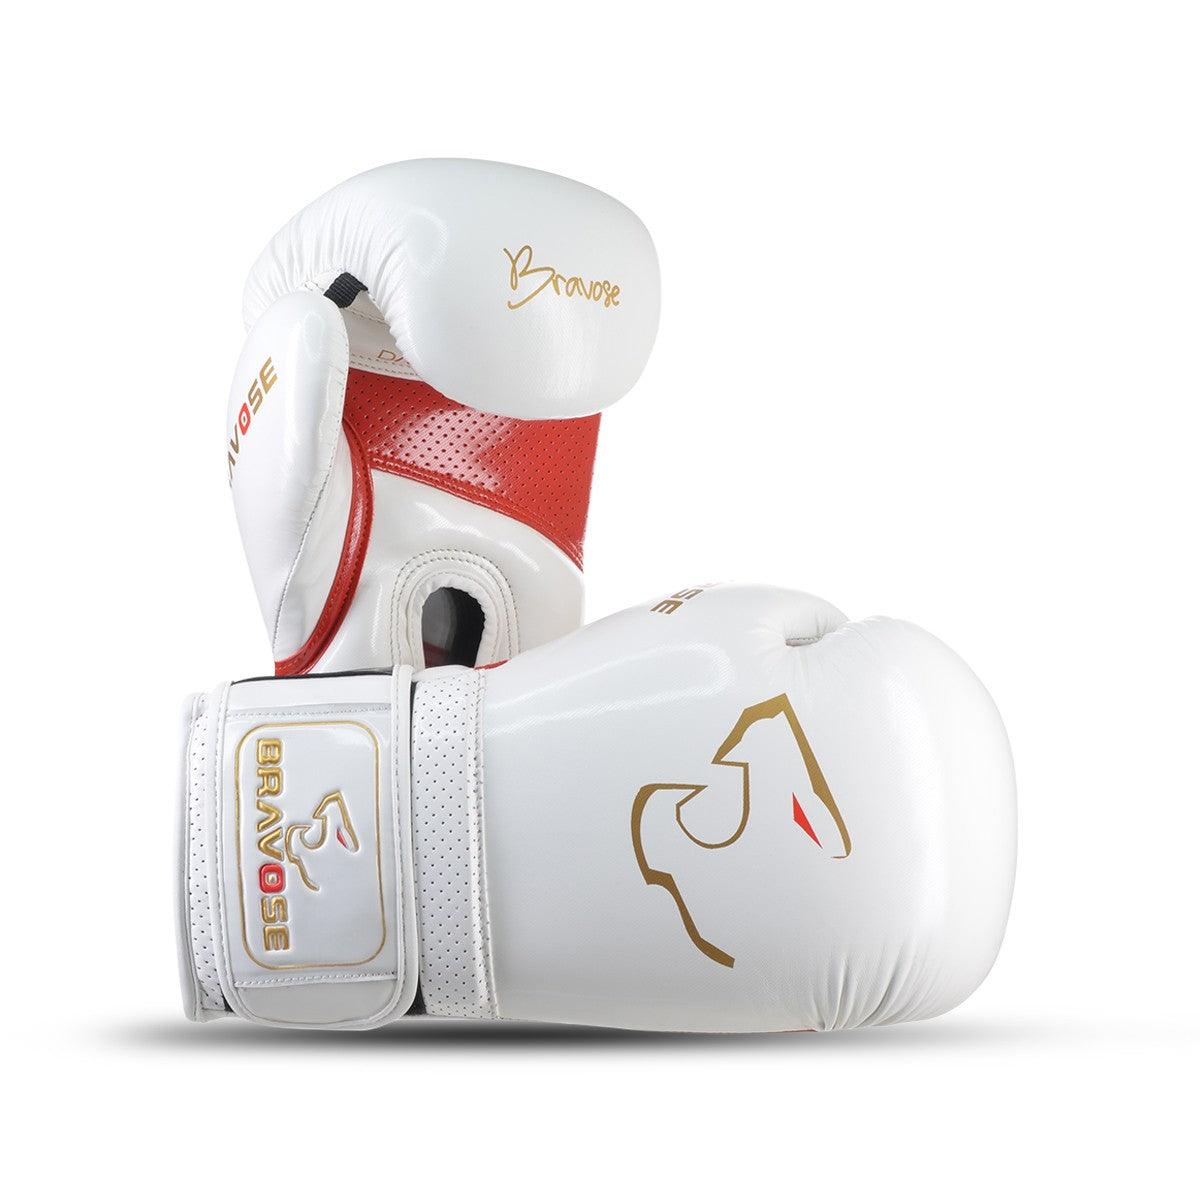 Premium Boxing Glove Review Valour Strike Golden Eagle by Fit2Box